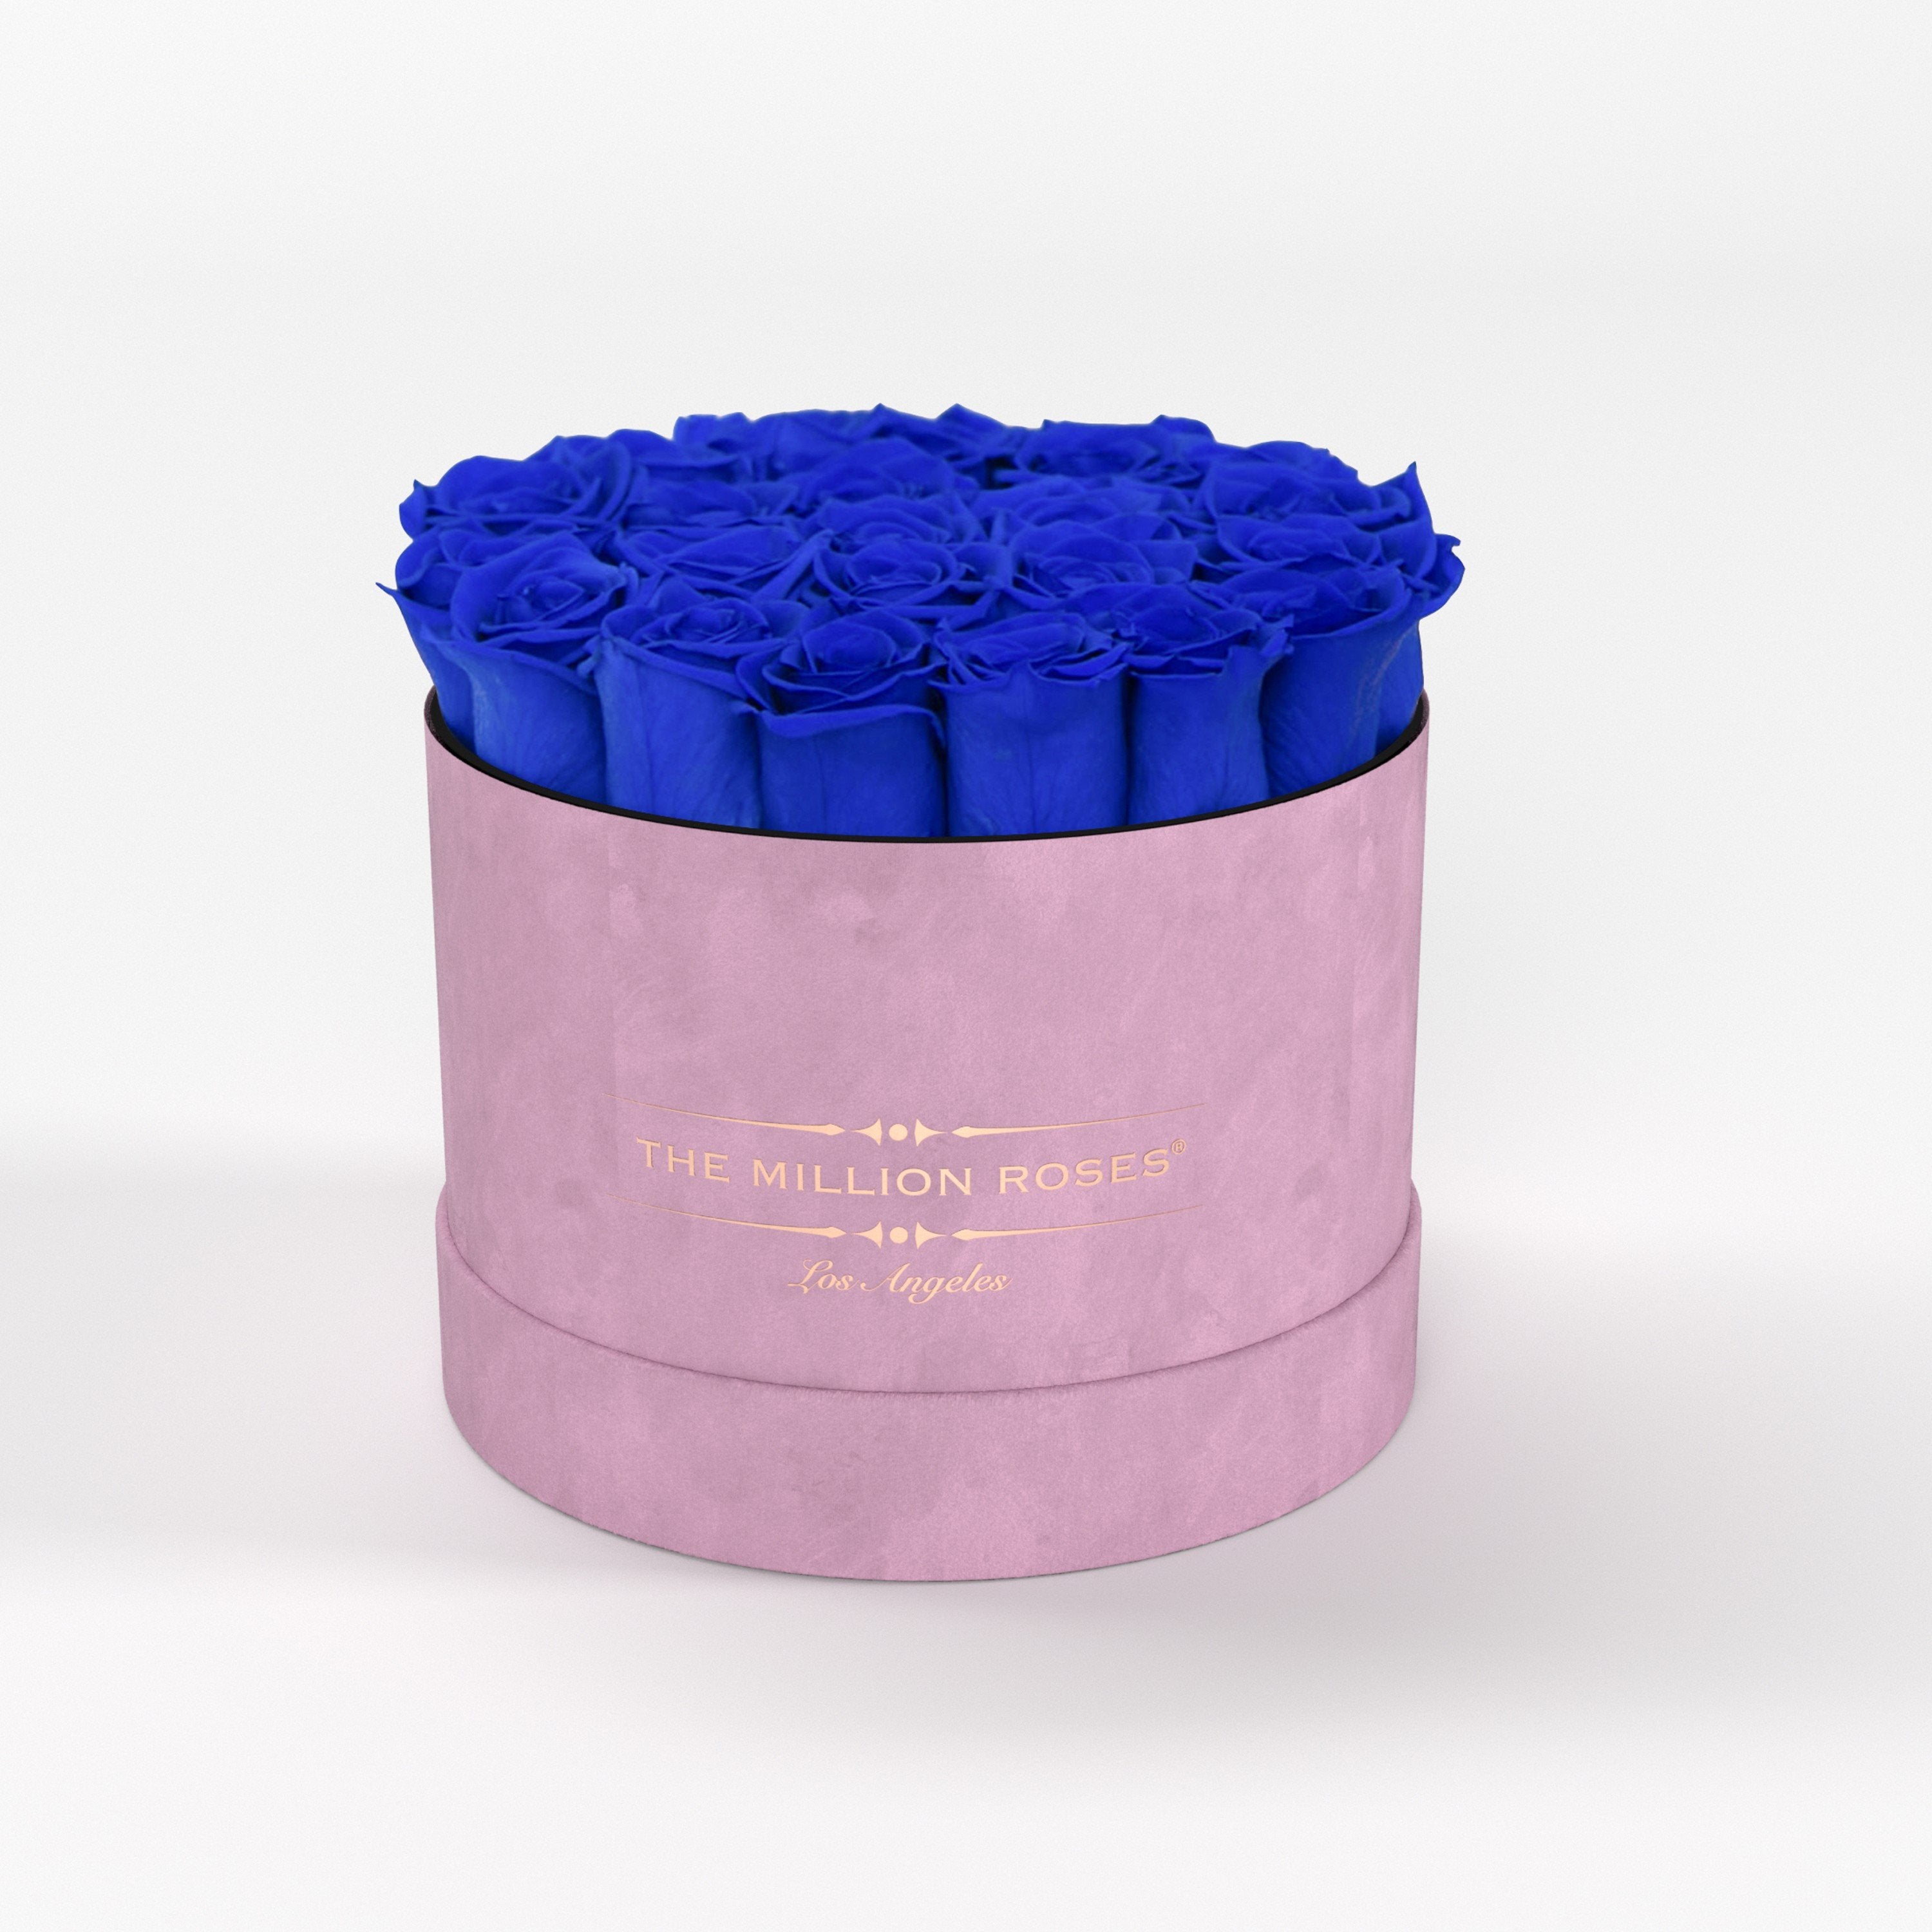 ( LA ) Light Pink - Suede - Classic Box with Royal Blue Roses Kit - the million roses